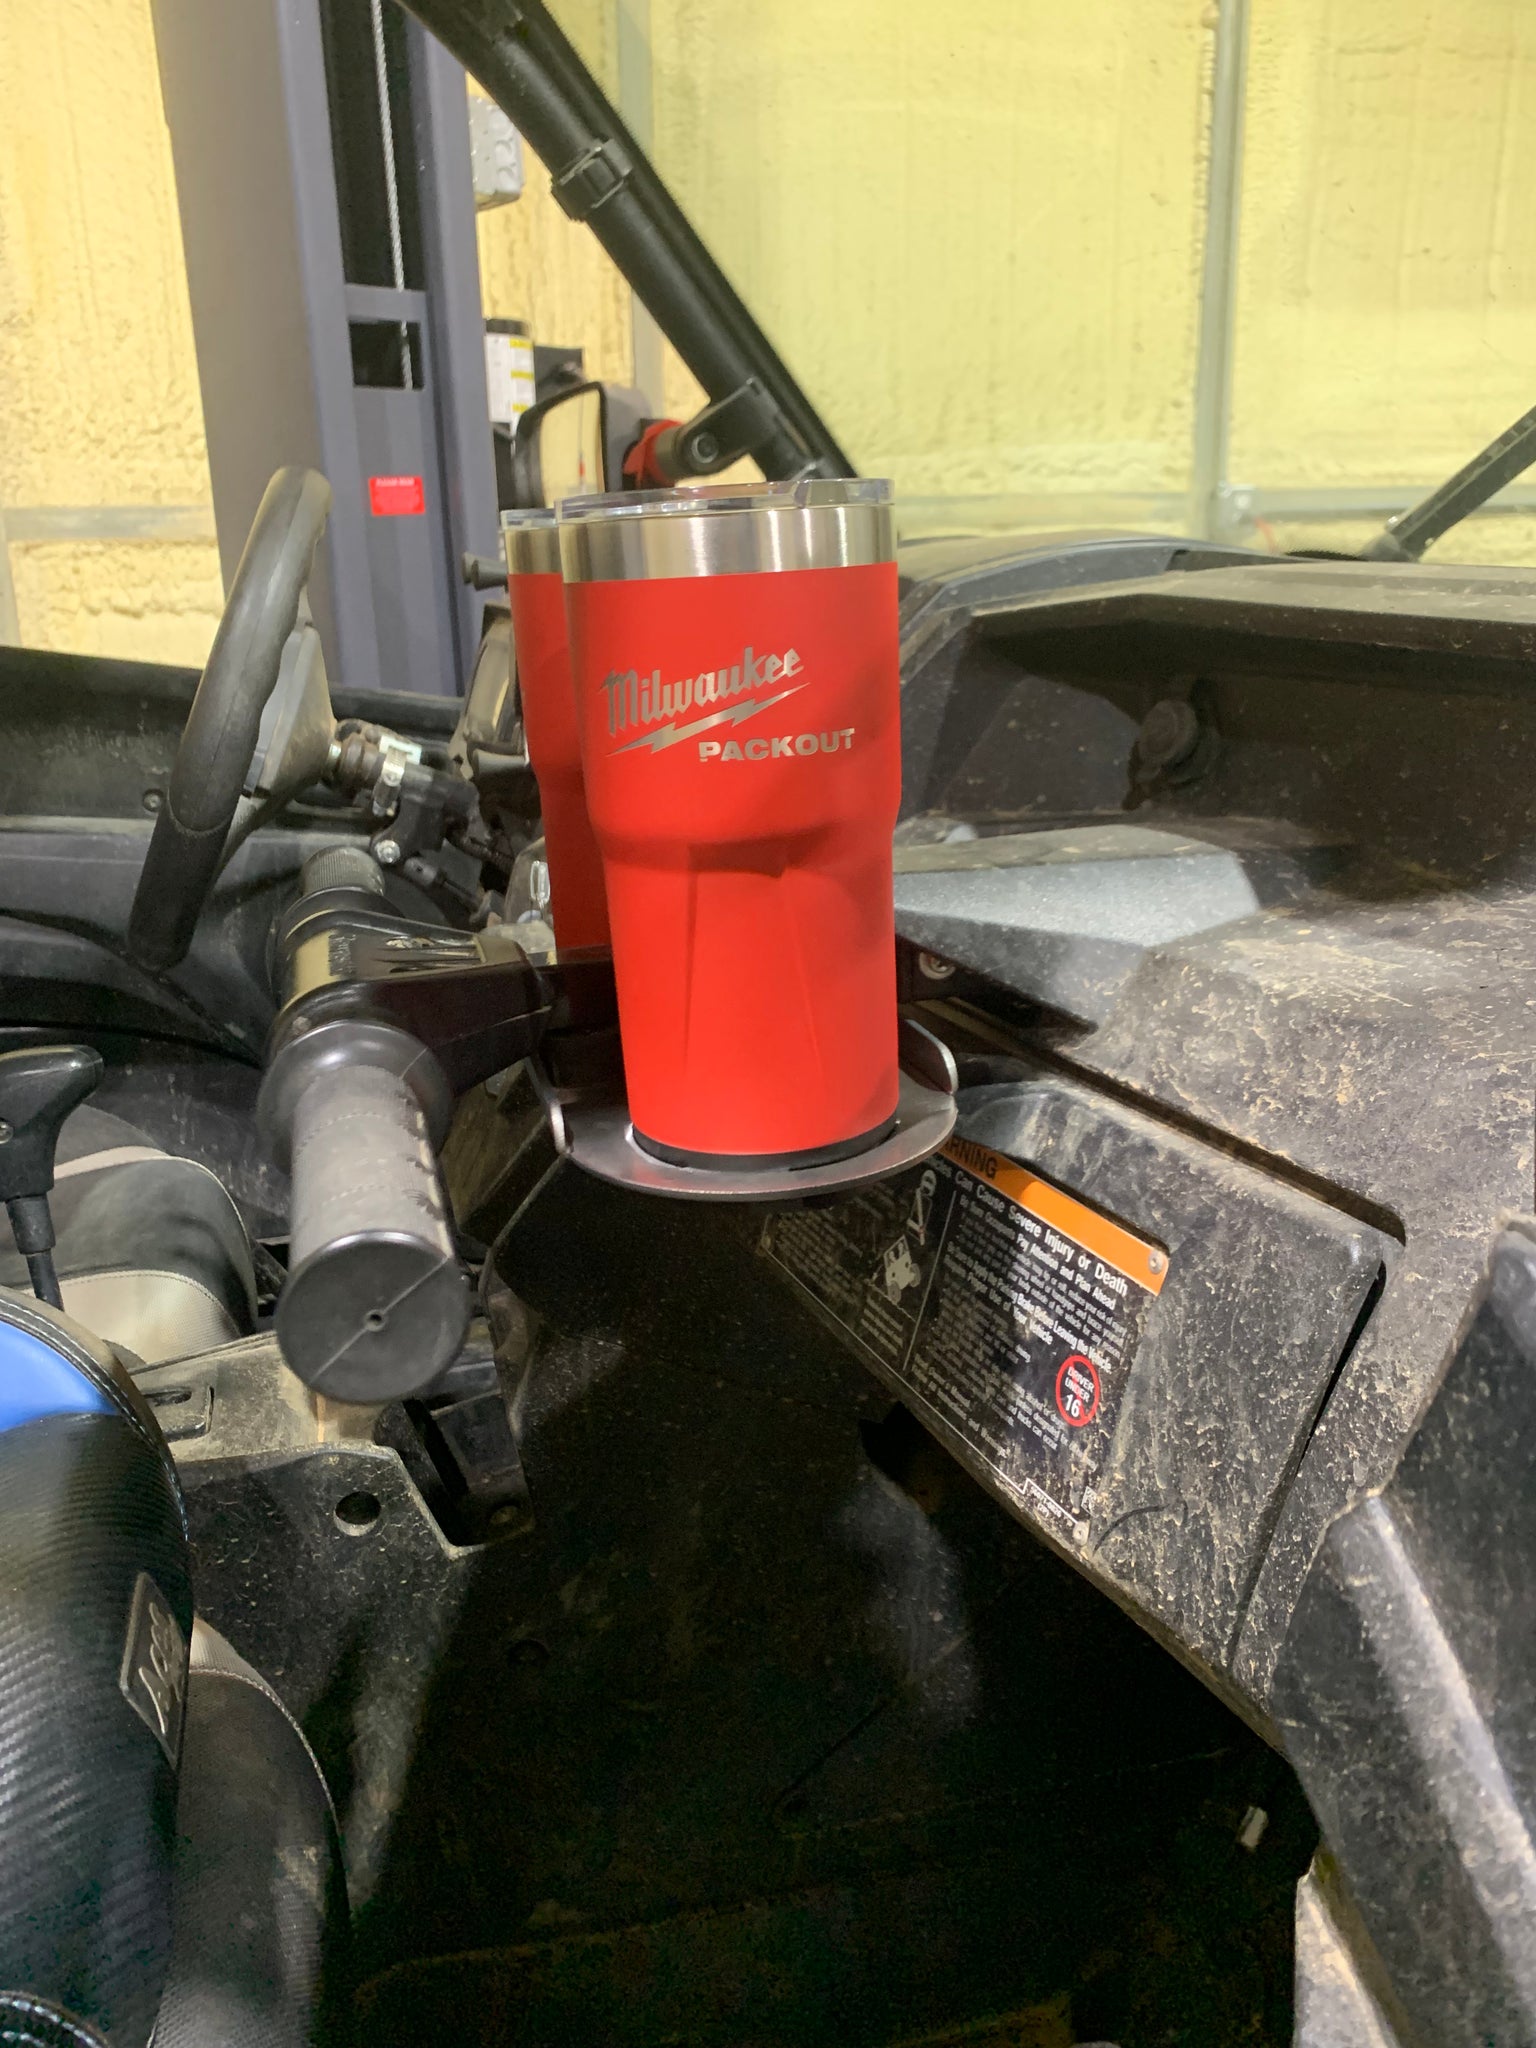 Cup Holder for Milwaukee Packout Cup